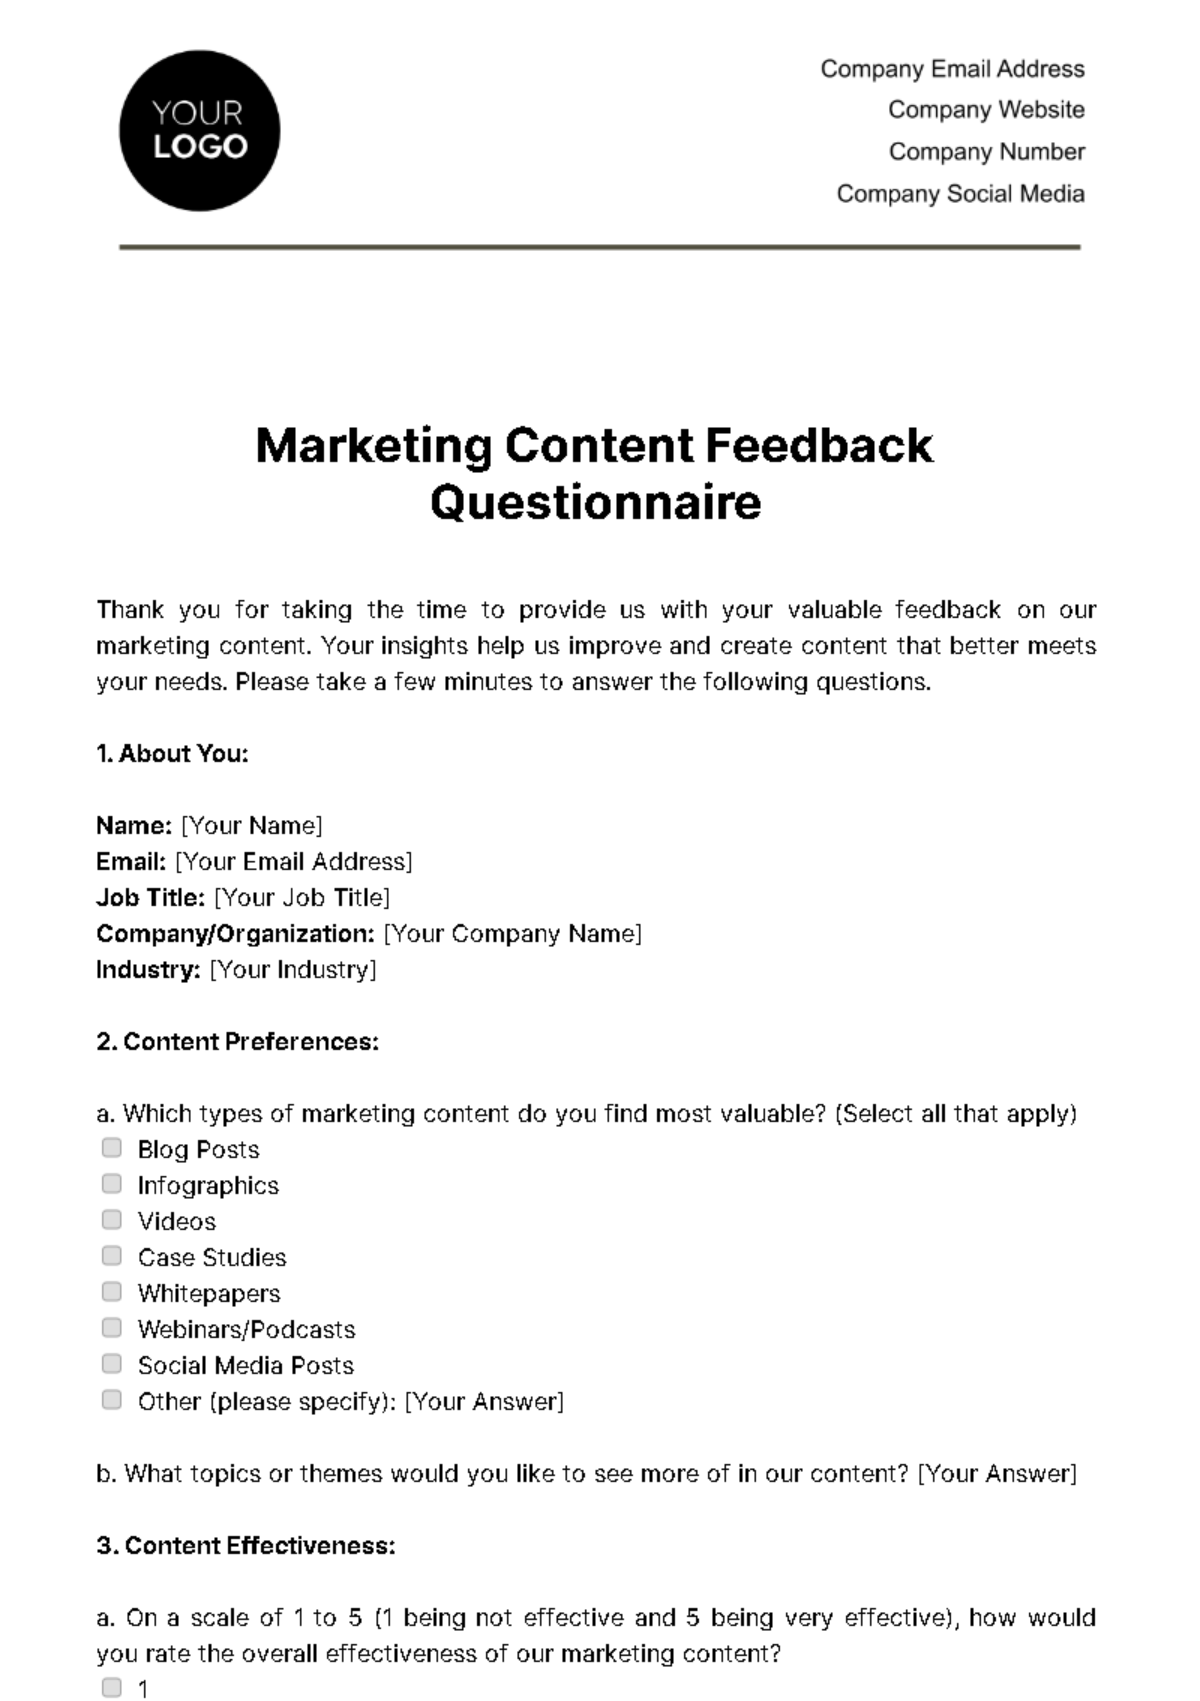 Marketing Content Feedback Questionnaire Template